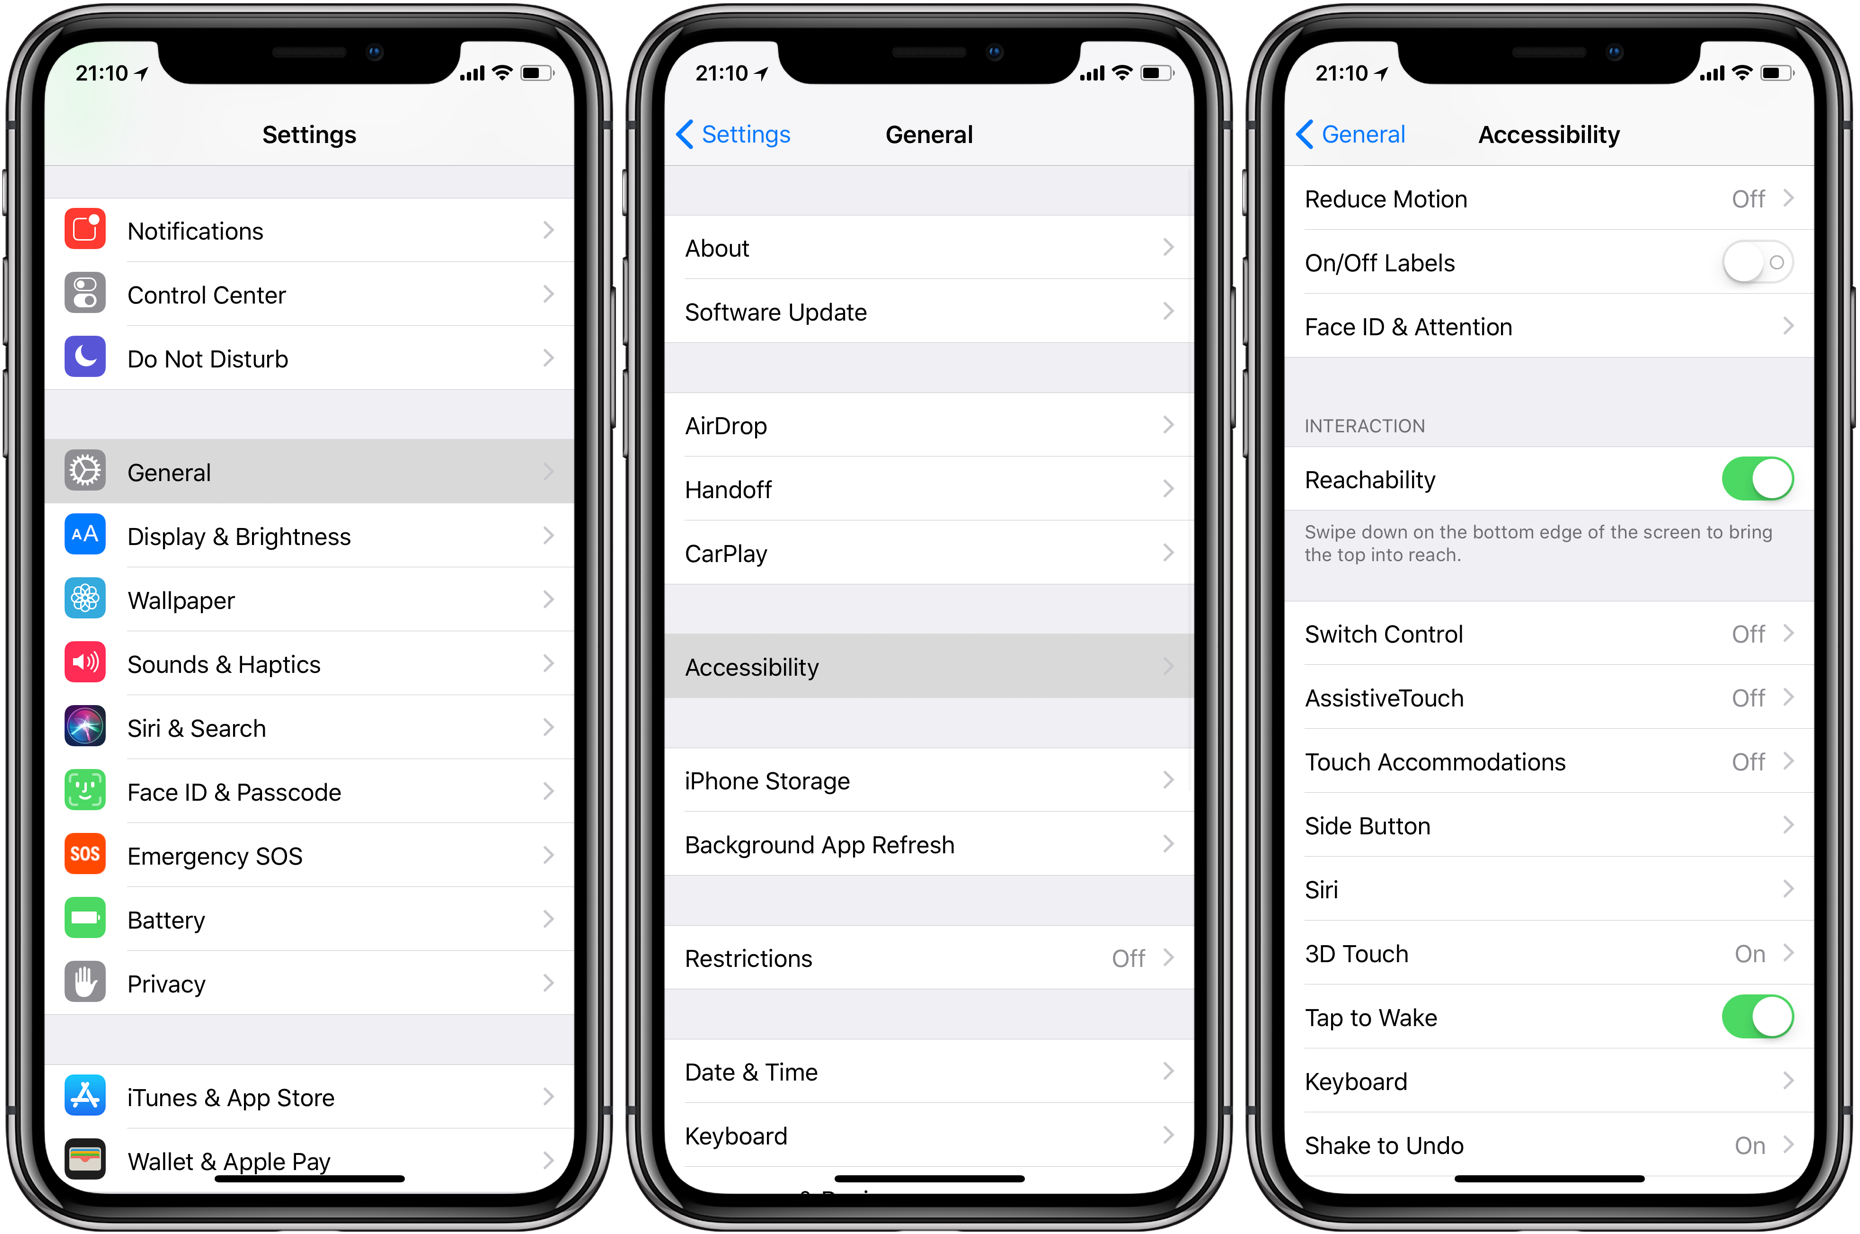 How to use Reachability on iPhone X